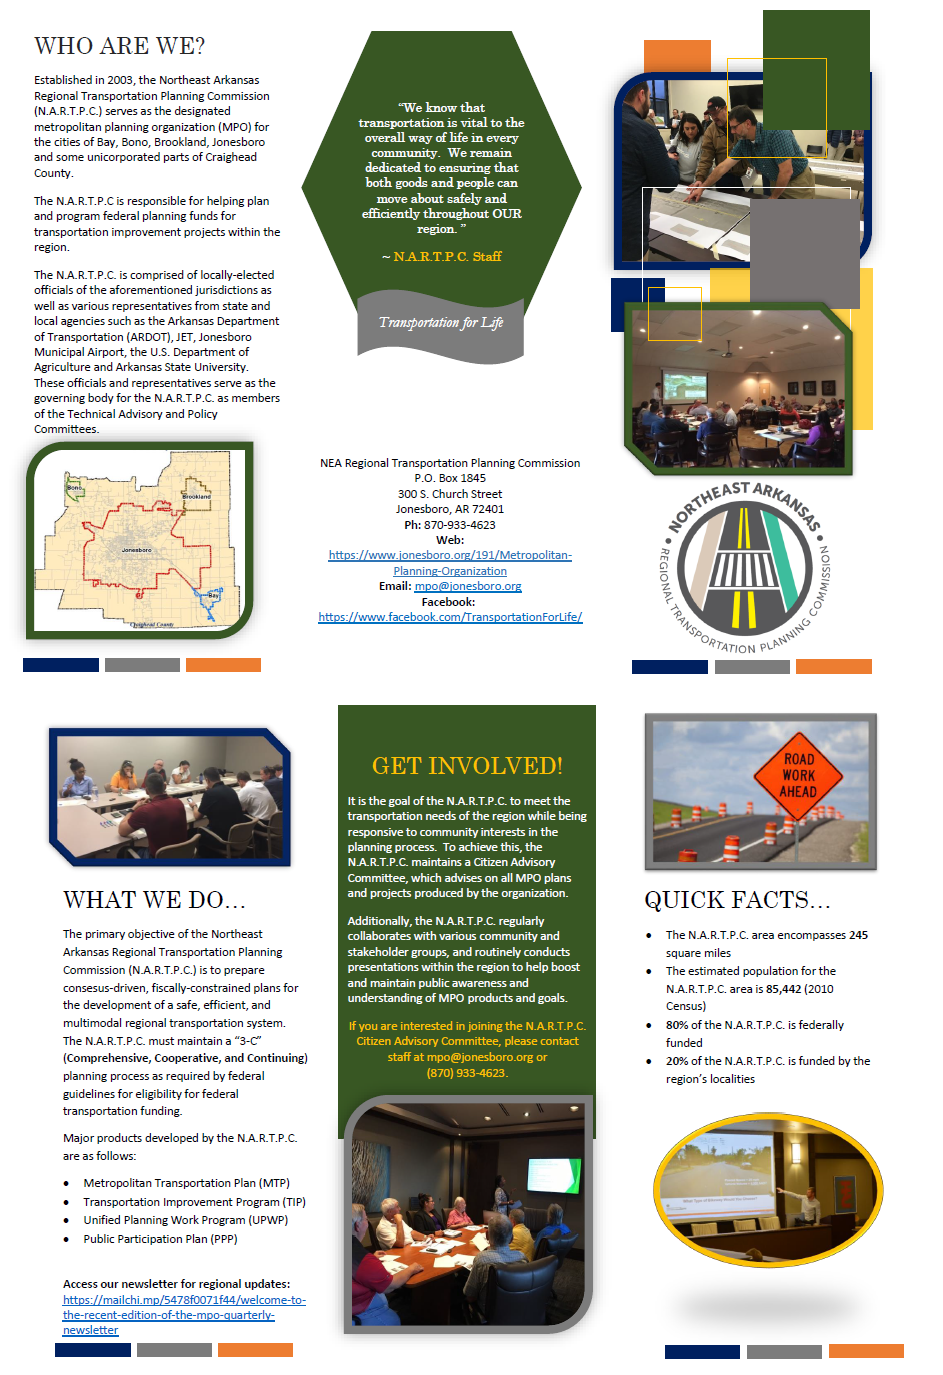 Official informational brochure for the MPO